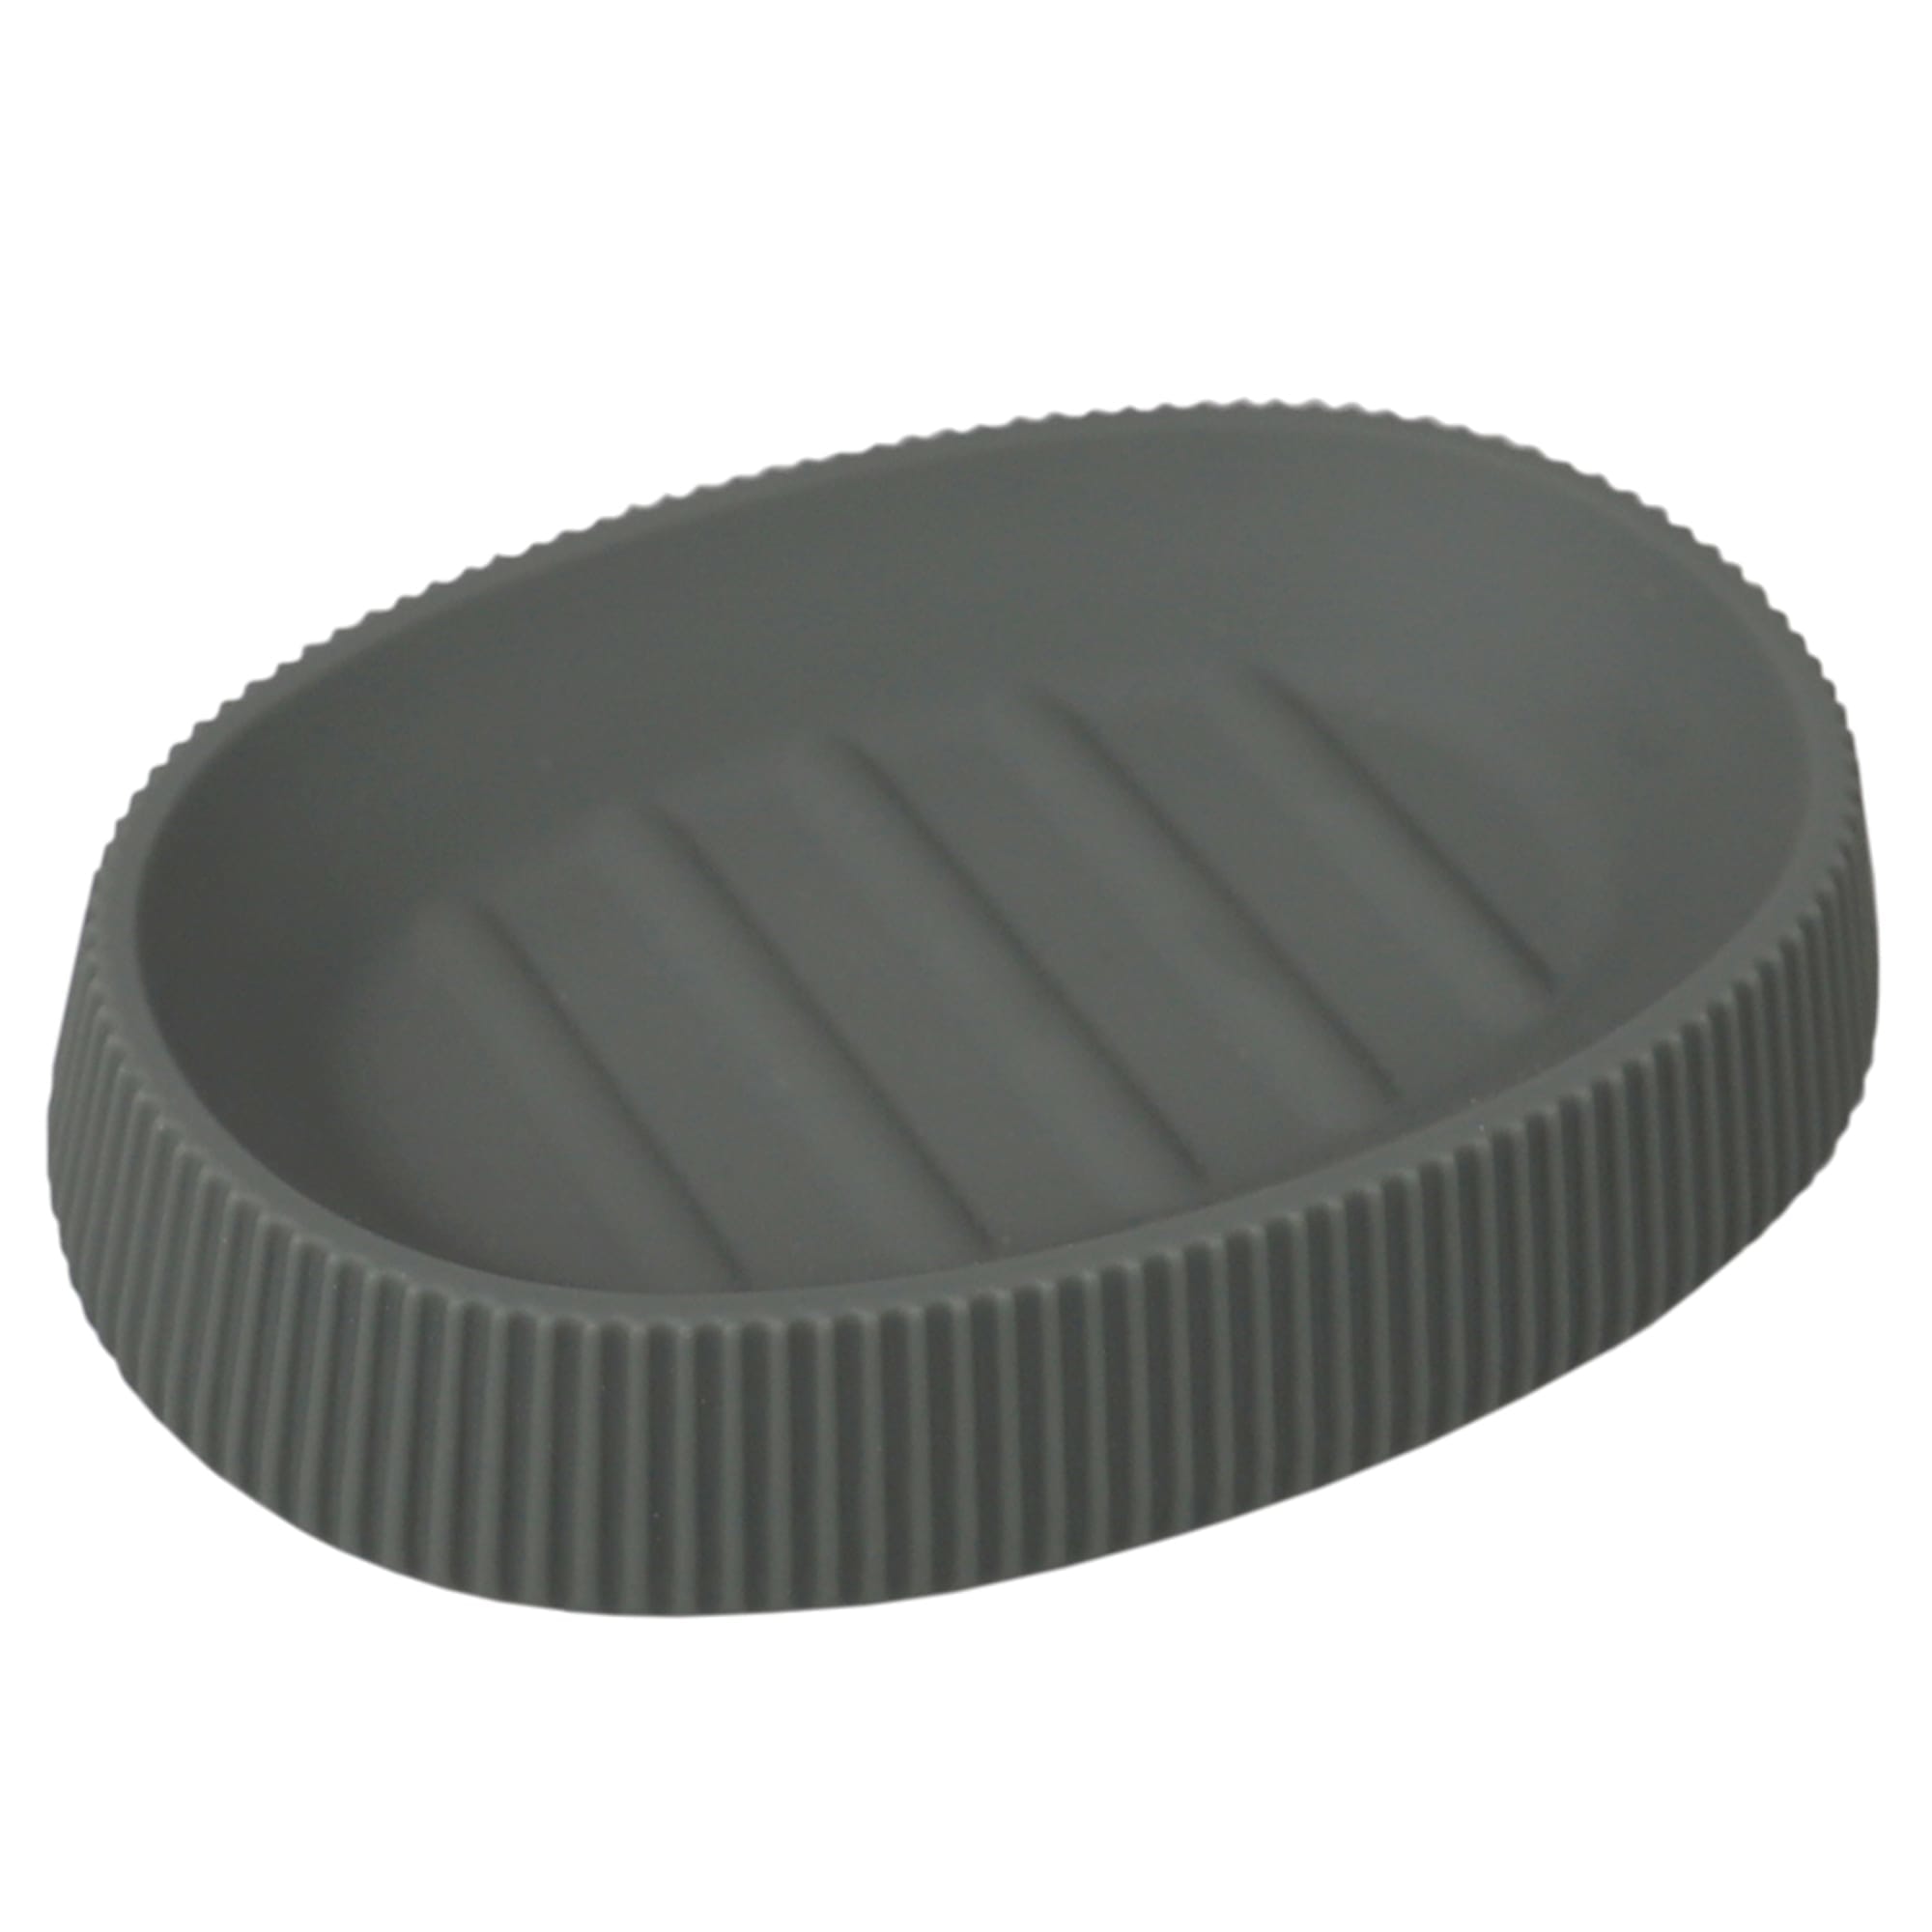 Home Basics Rubberized Plastic Soap Dish with Textured Outer Edges, Grey $3 EACH, CASE PACK OF 12